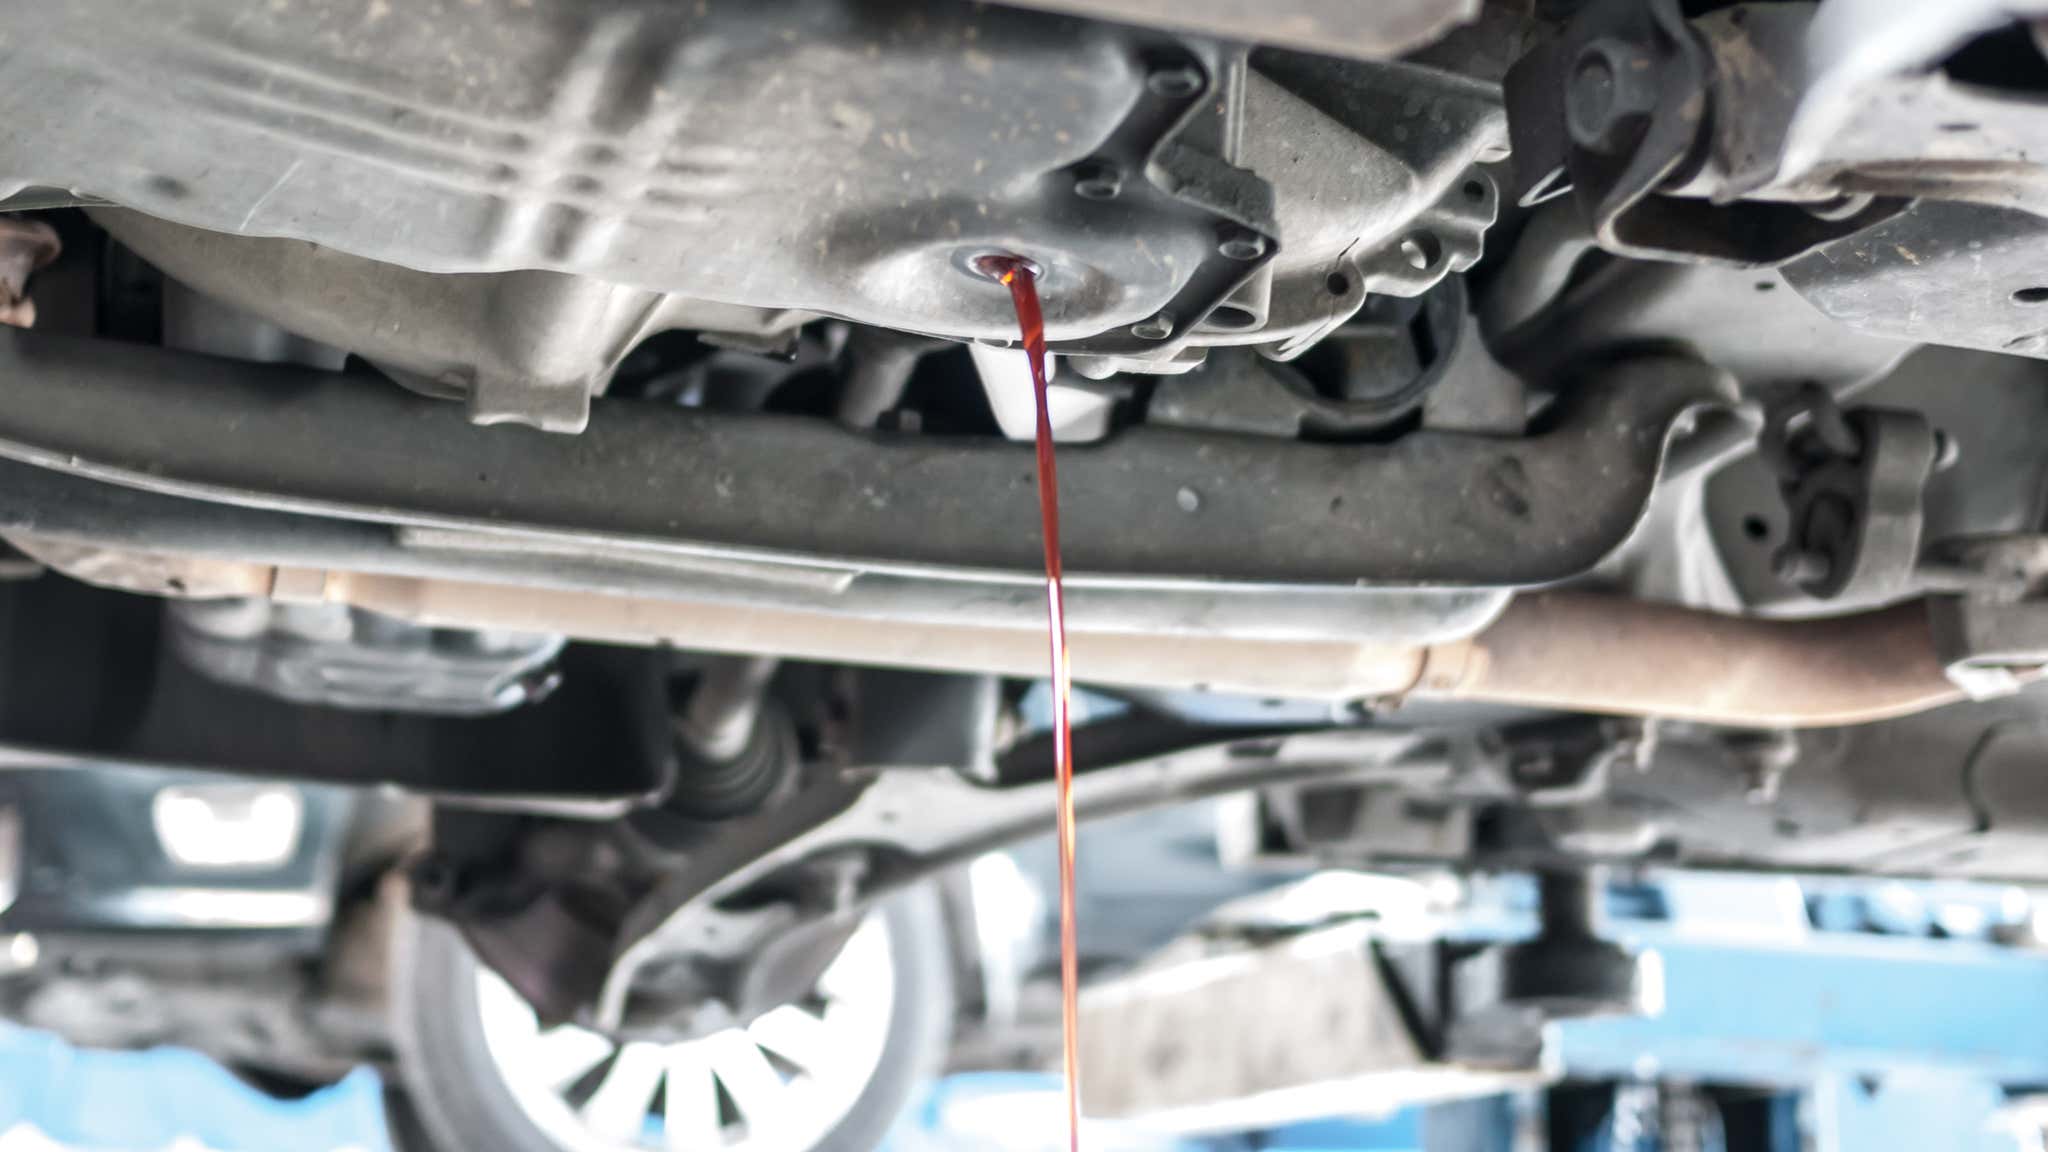   Depositphotos You'll need to drain the transmission fluid before performing repairs.